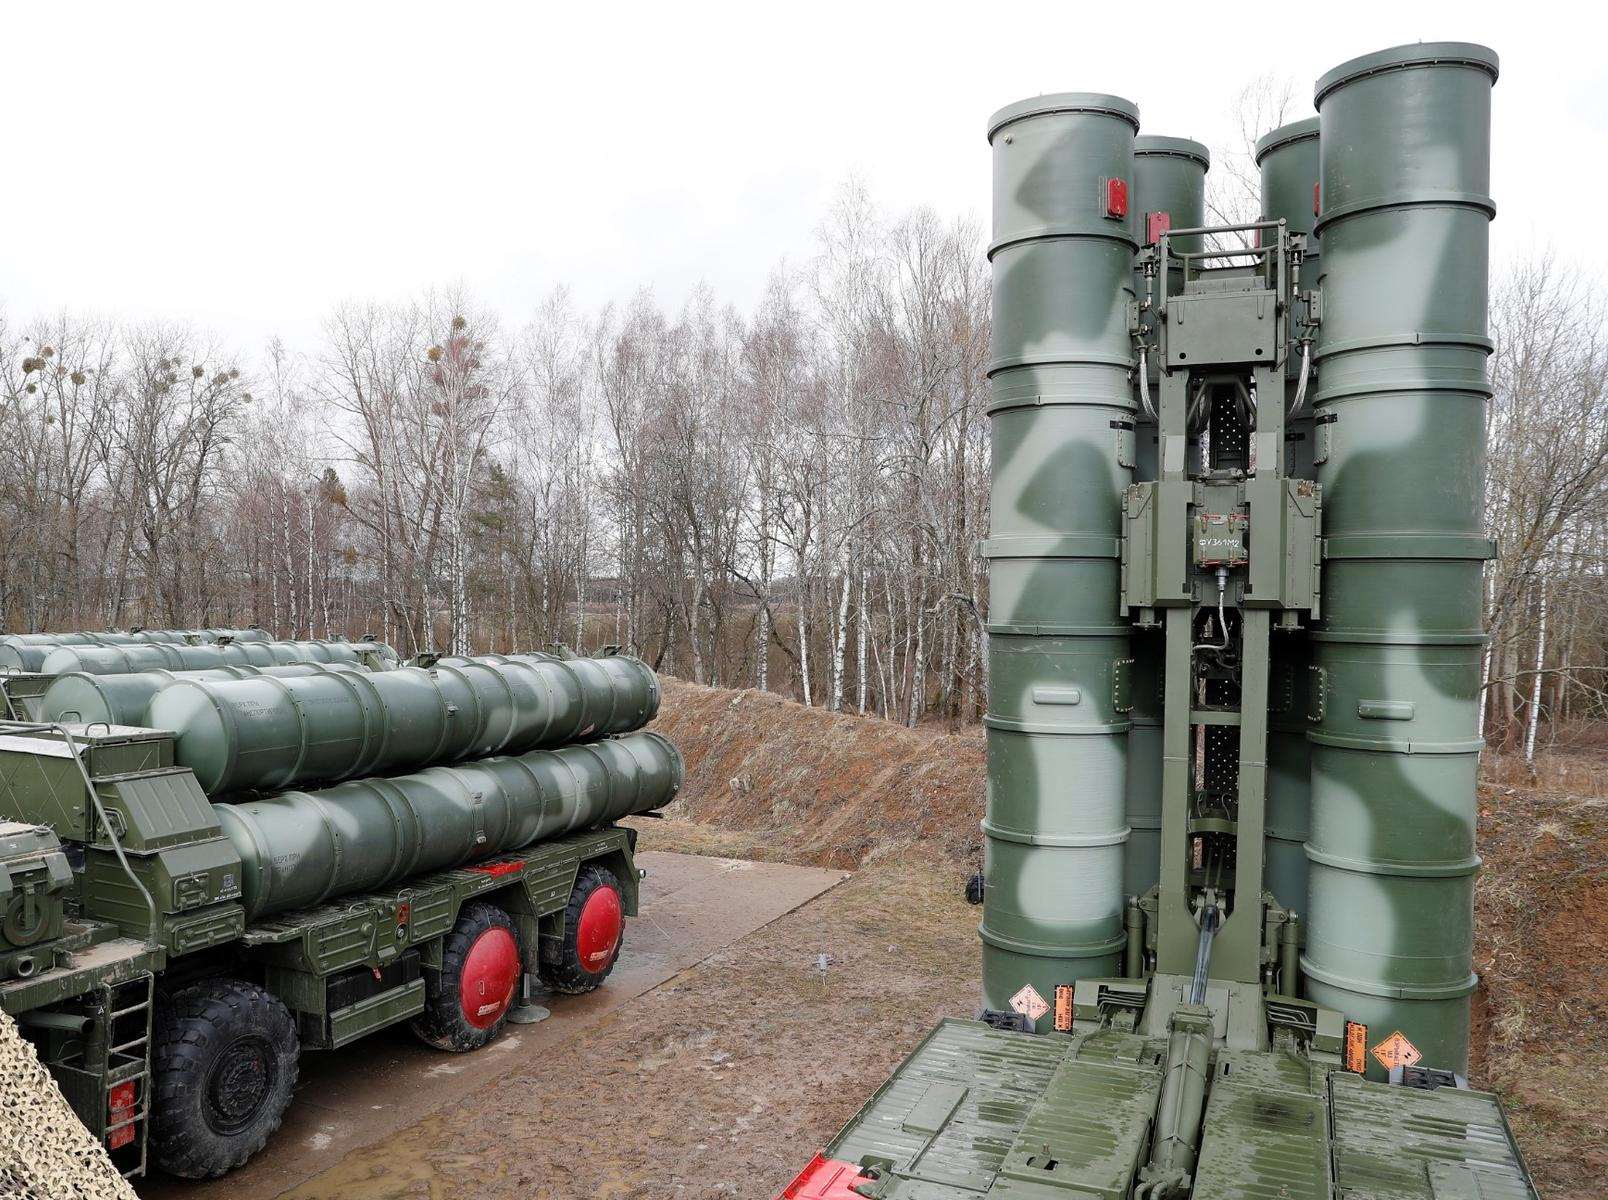 Russia’s S-400 Vs America’s Aegis And Patriot: Battle Of The Air Defense Giants!